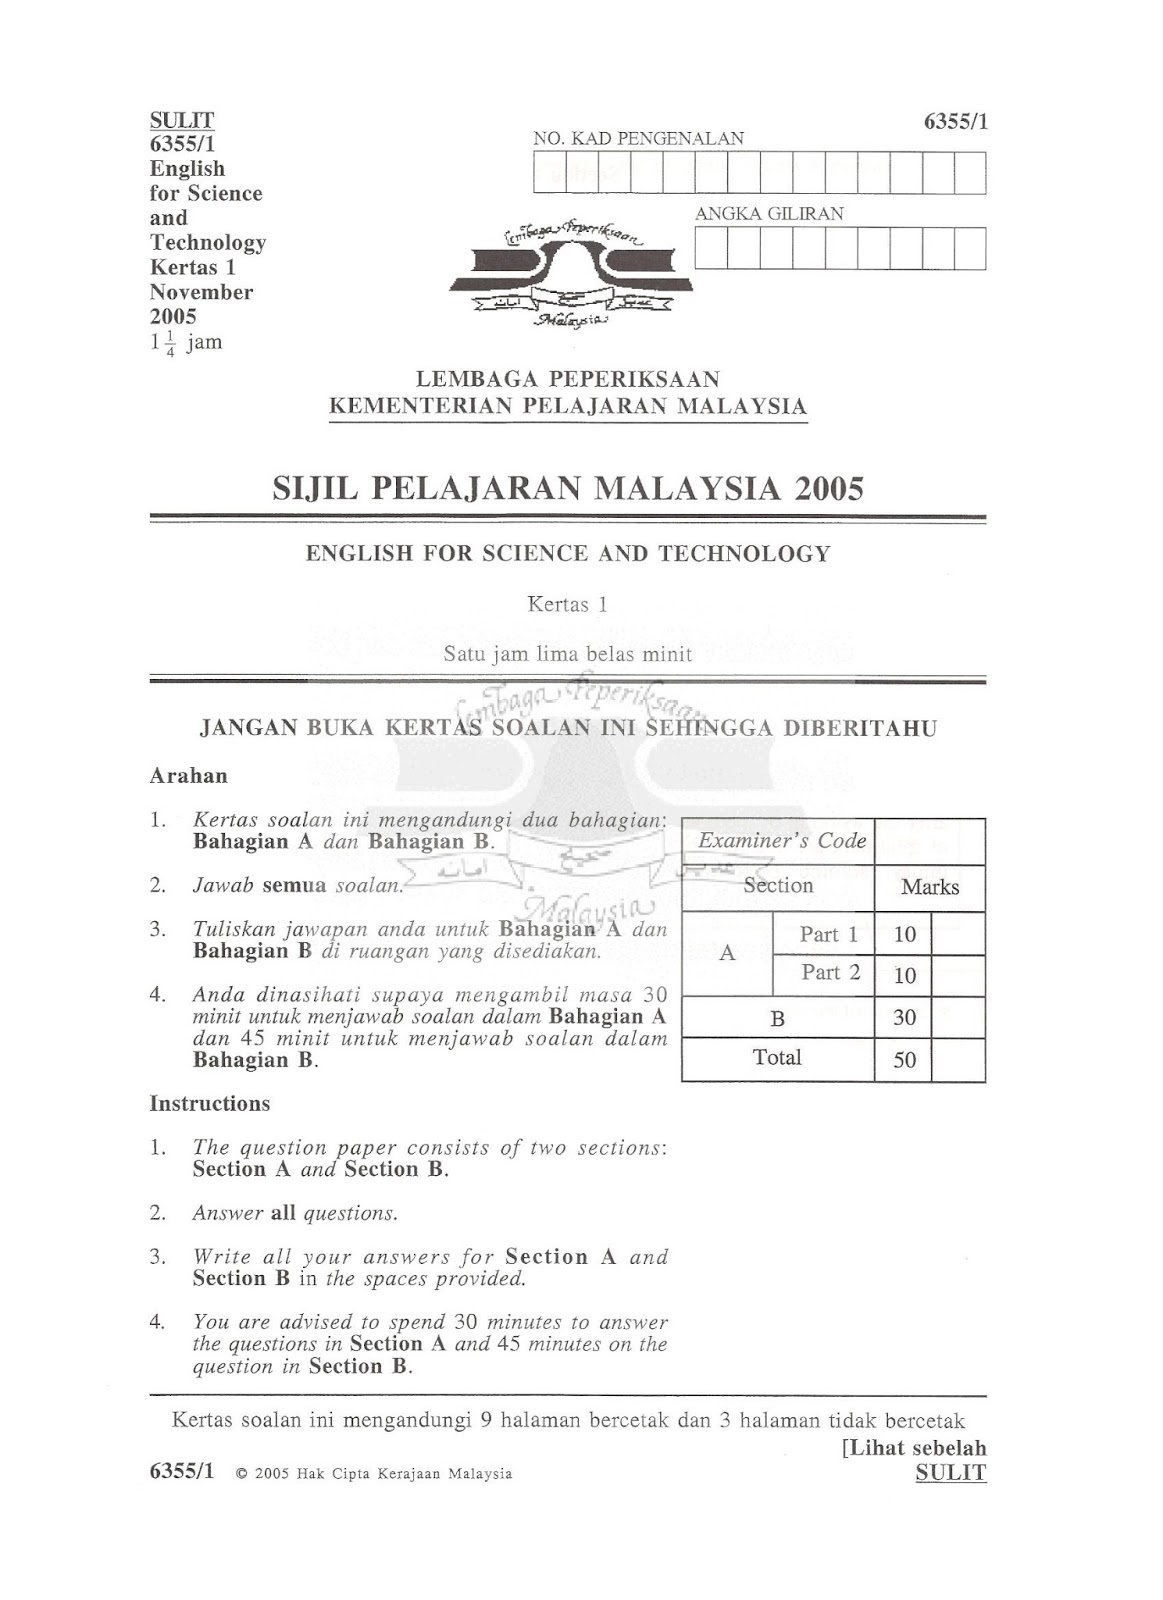 SOALAN LEPAS SPM 2005 ( ENGLISH IN SCIENCE AND TECHNOLOGY 